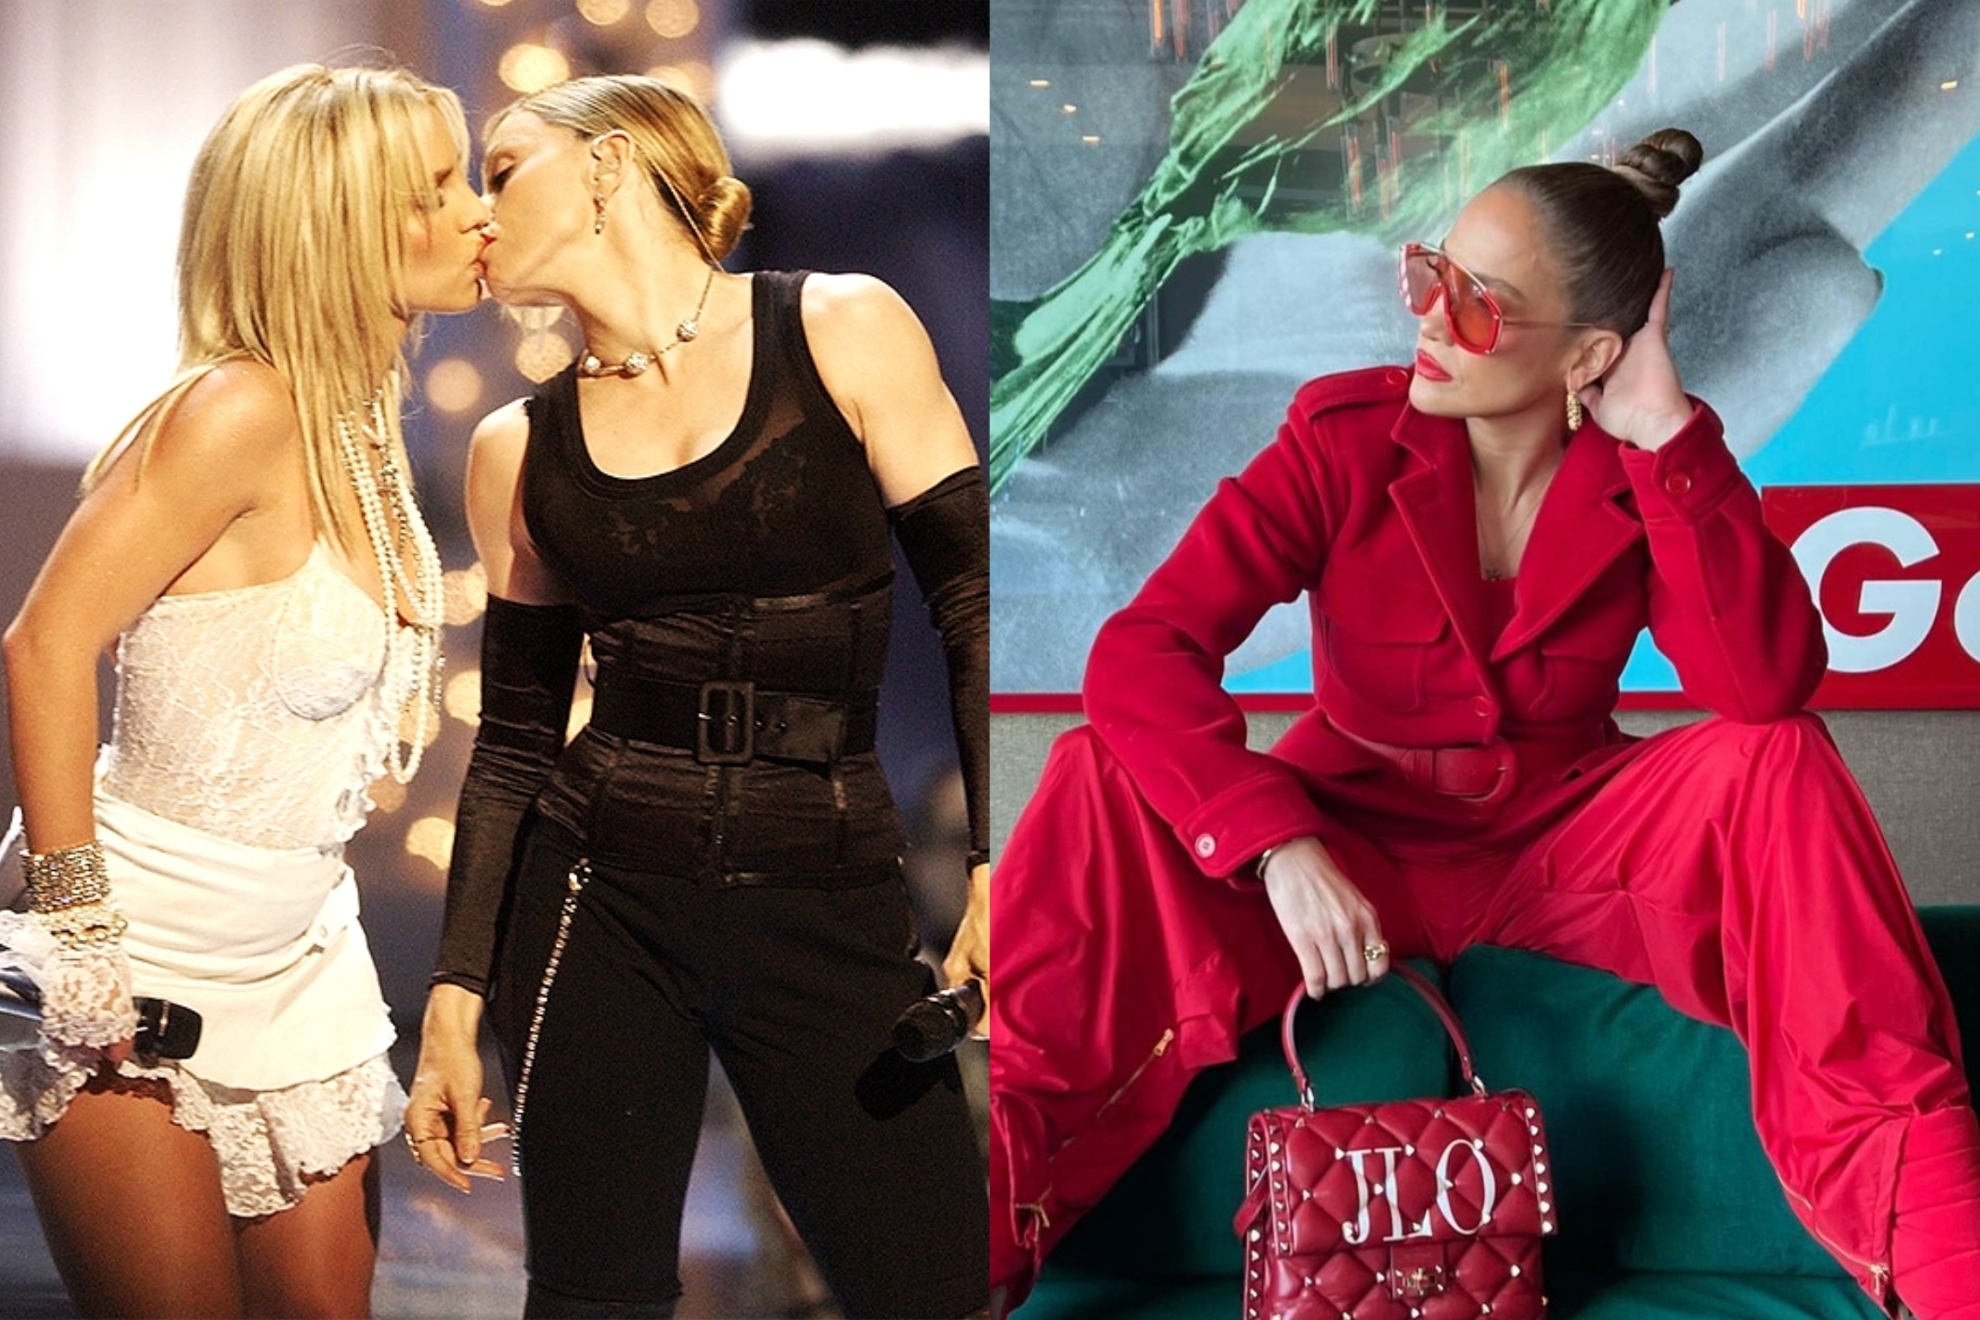 Britney Spears kisses Madonna at the MTV Awards, J-LO appears on the side photo.